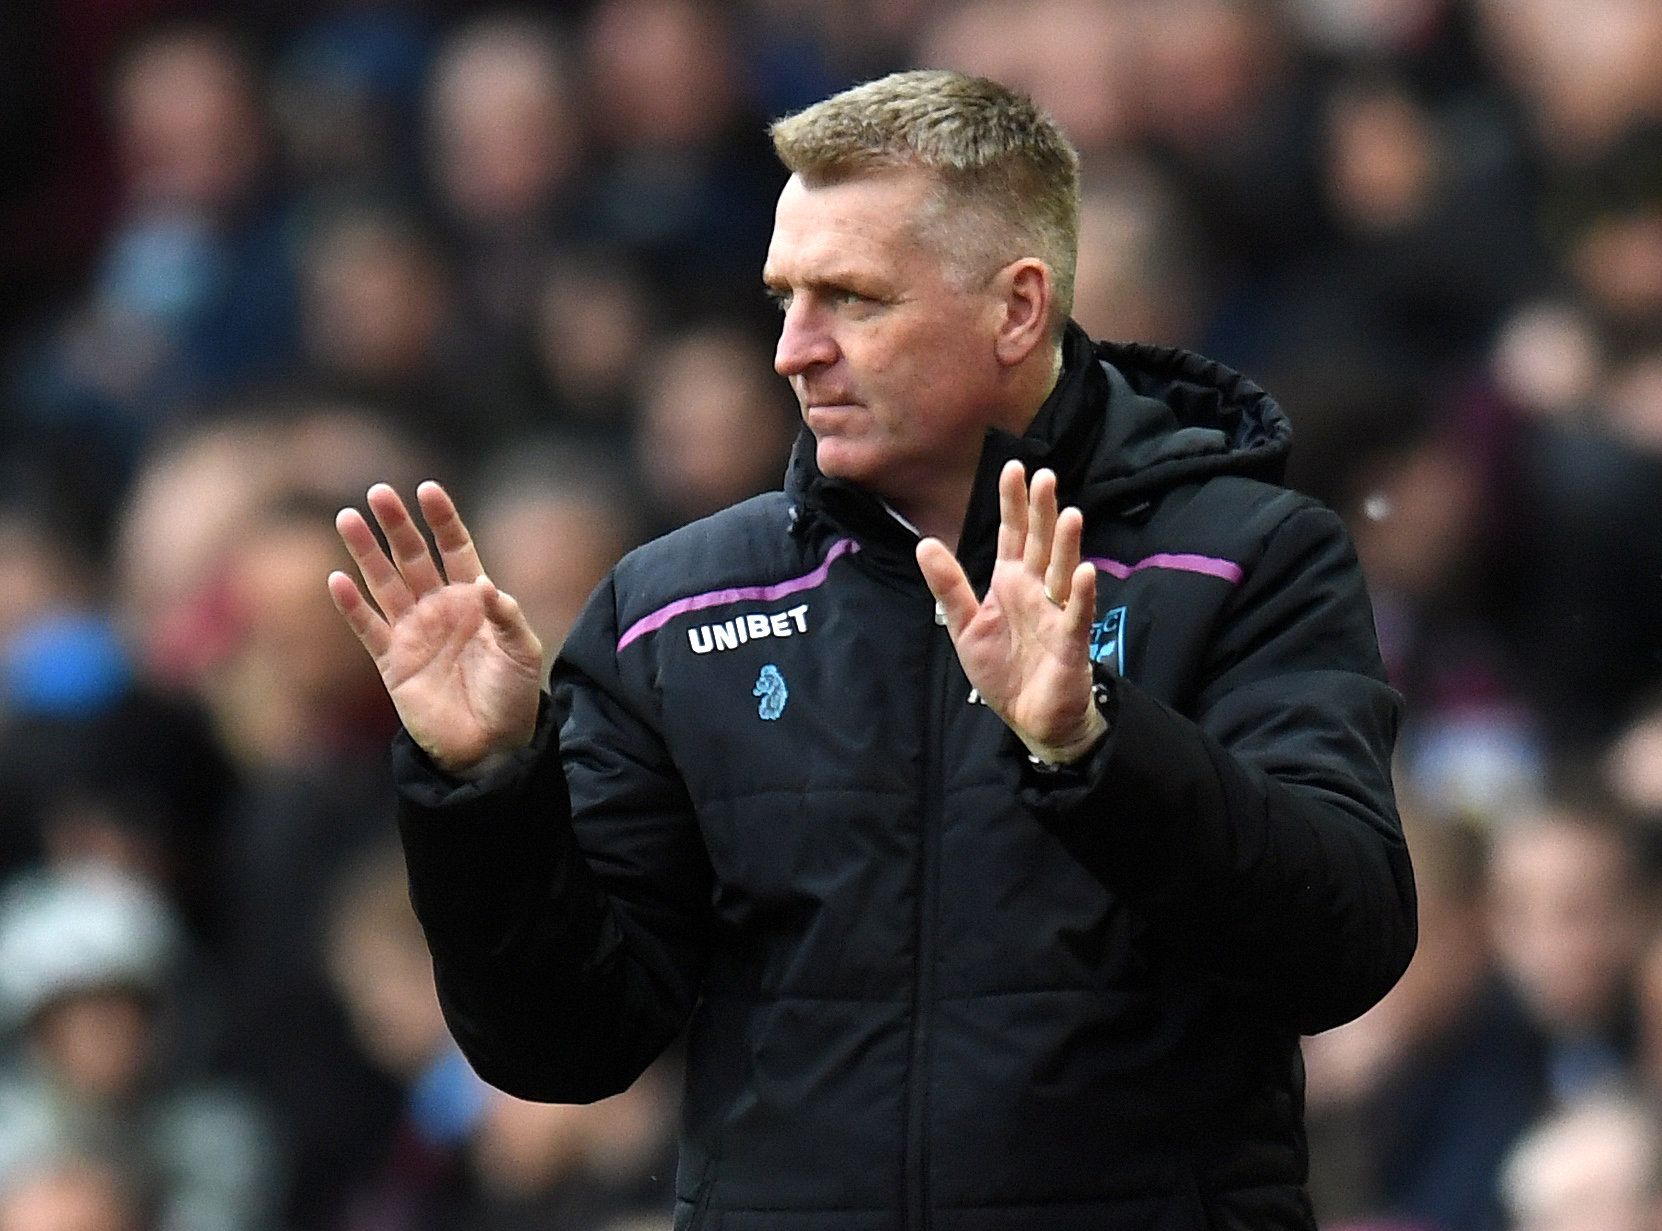 Soccer Football - Championship - Aston Villa v Middlesbrough - Villa Park, Birmingham, Britain - March 16, 2019   Aston Villa manager Dean Smith    Action Images/Alan Walter    EDITORIAL USE ONLY. No use with unauthorized audio, video, data, fixture lists, club/league logos or 